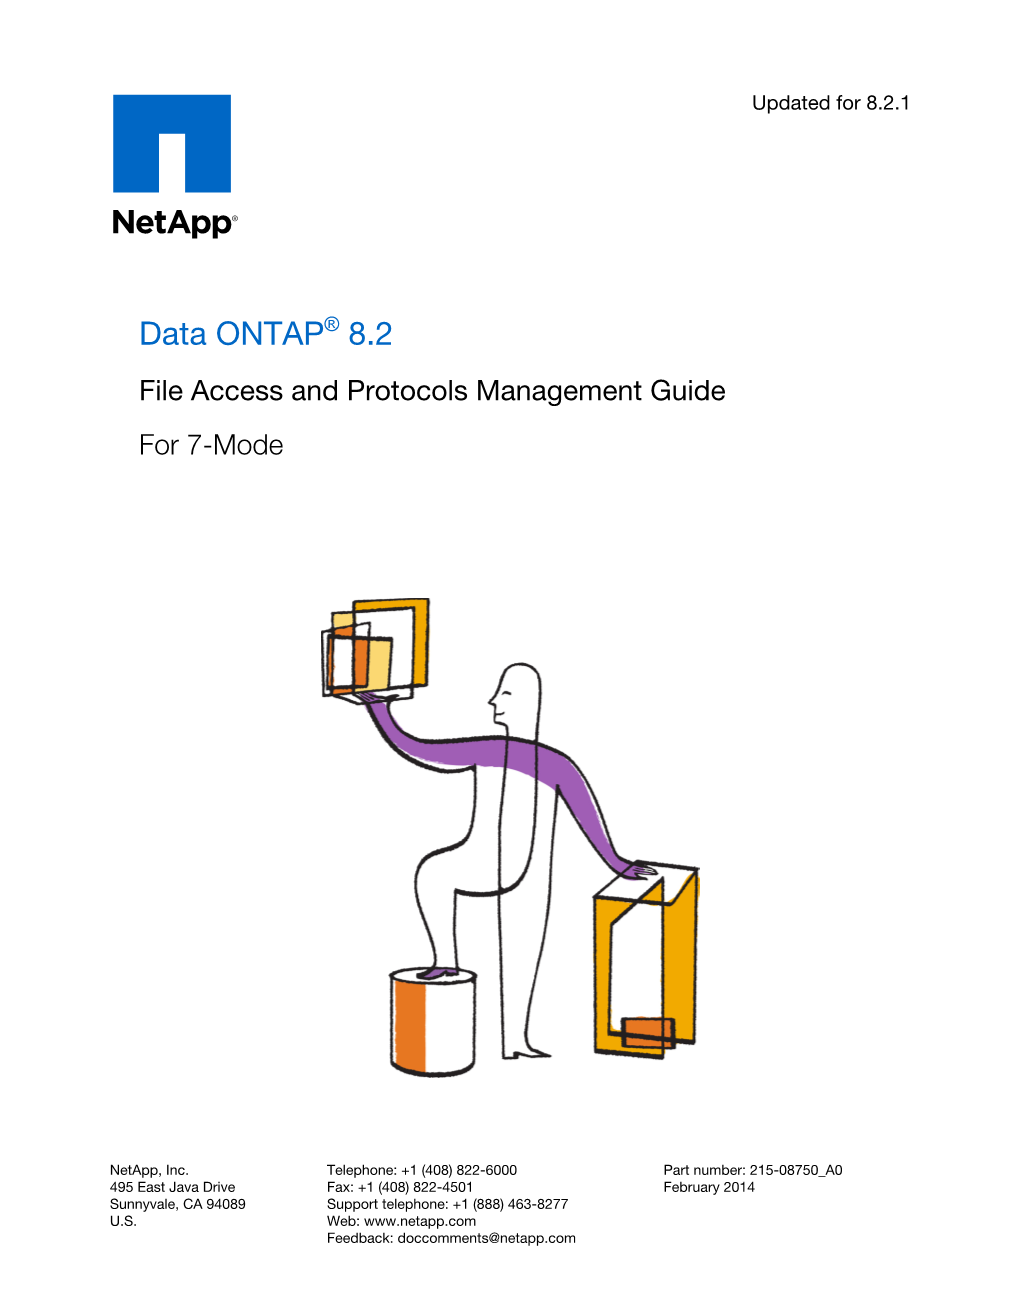 Data ONTAP 8.2 File Access and Protocols Management Guide for 7-Mode